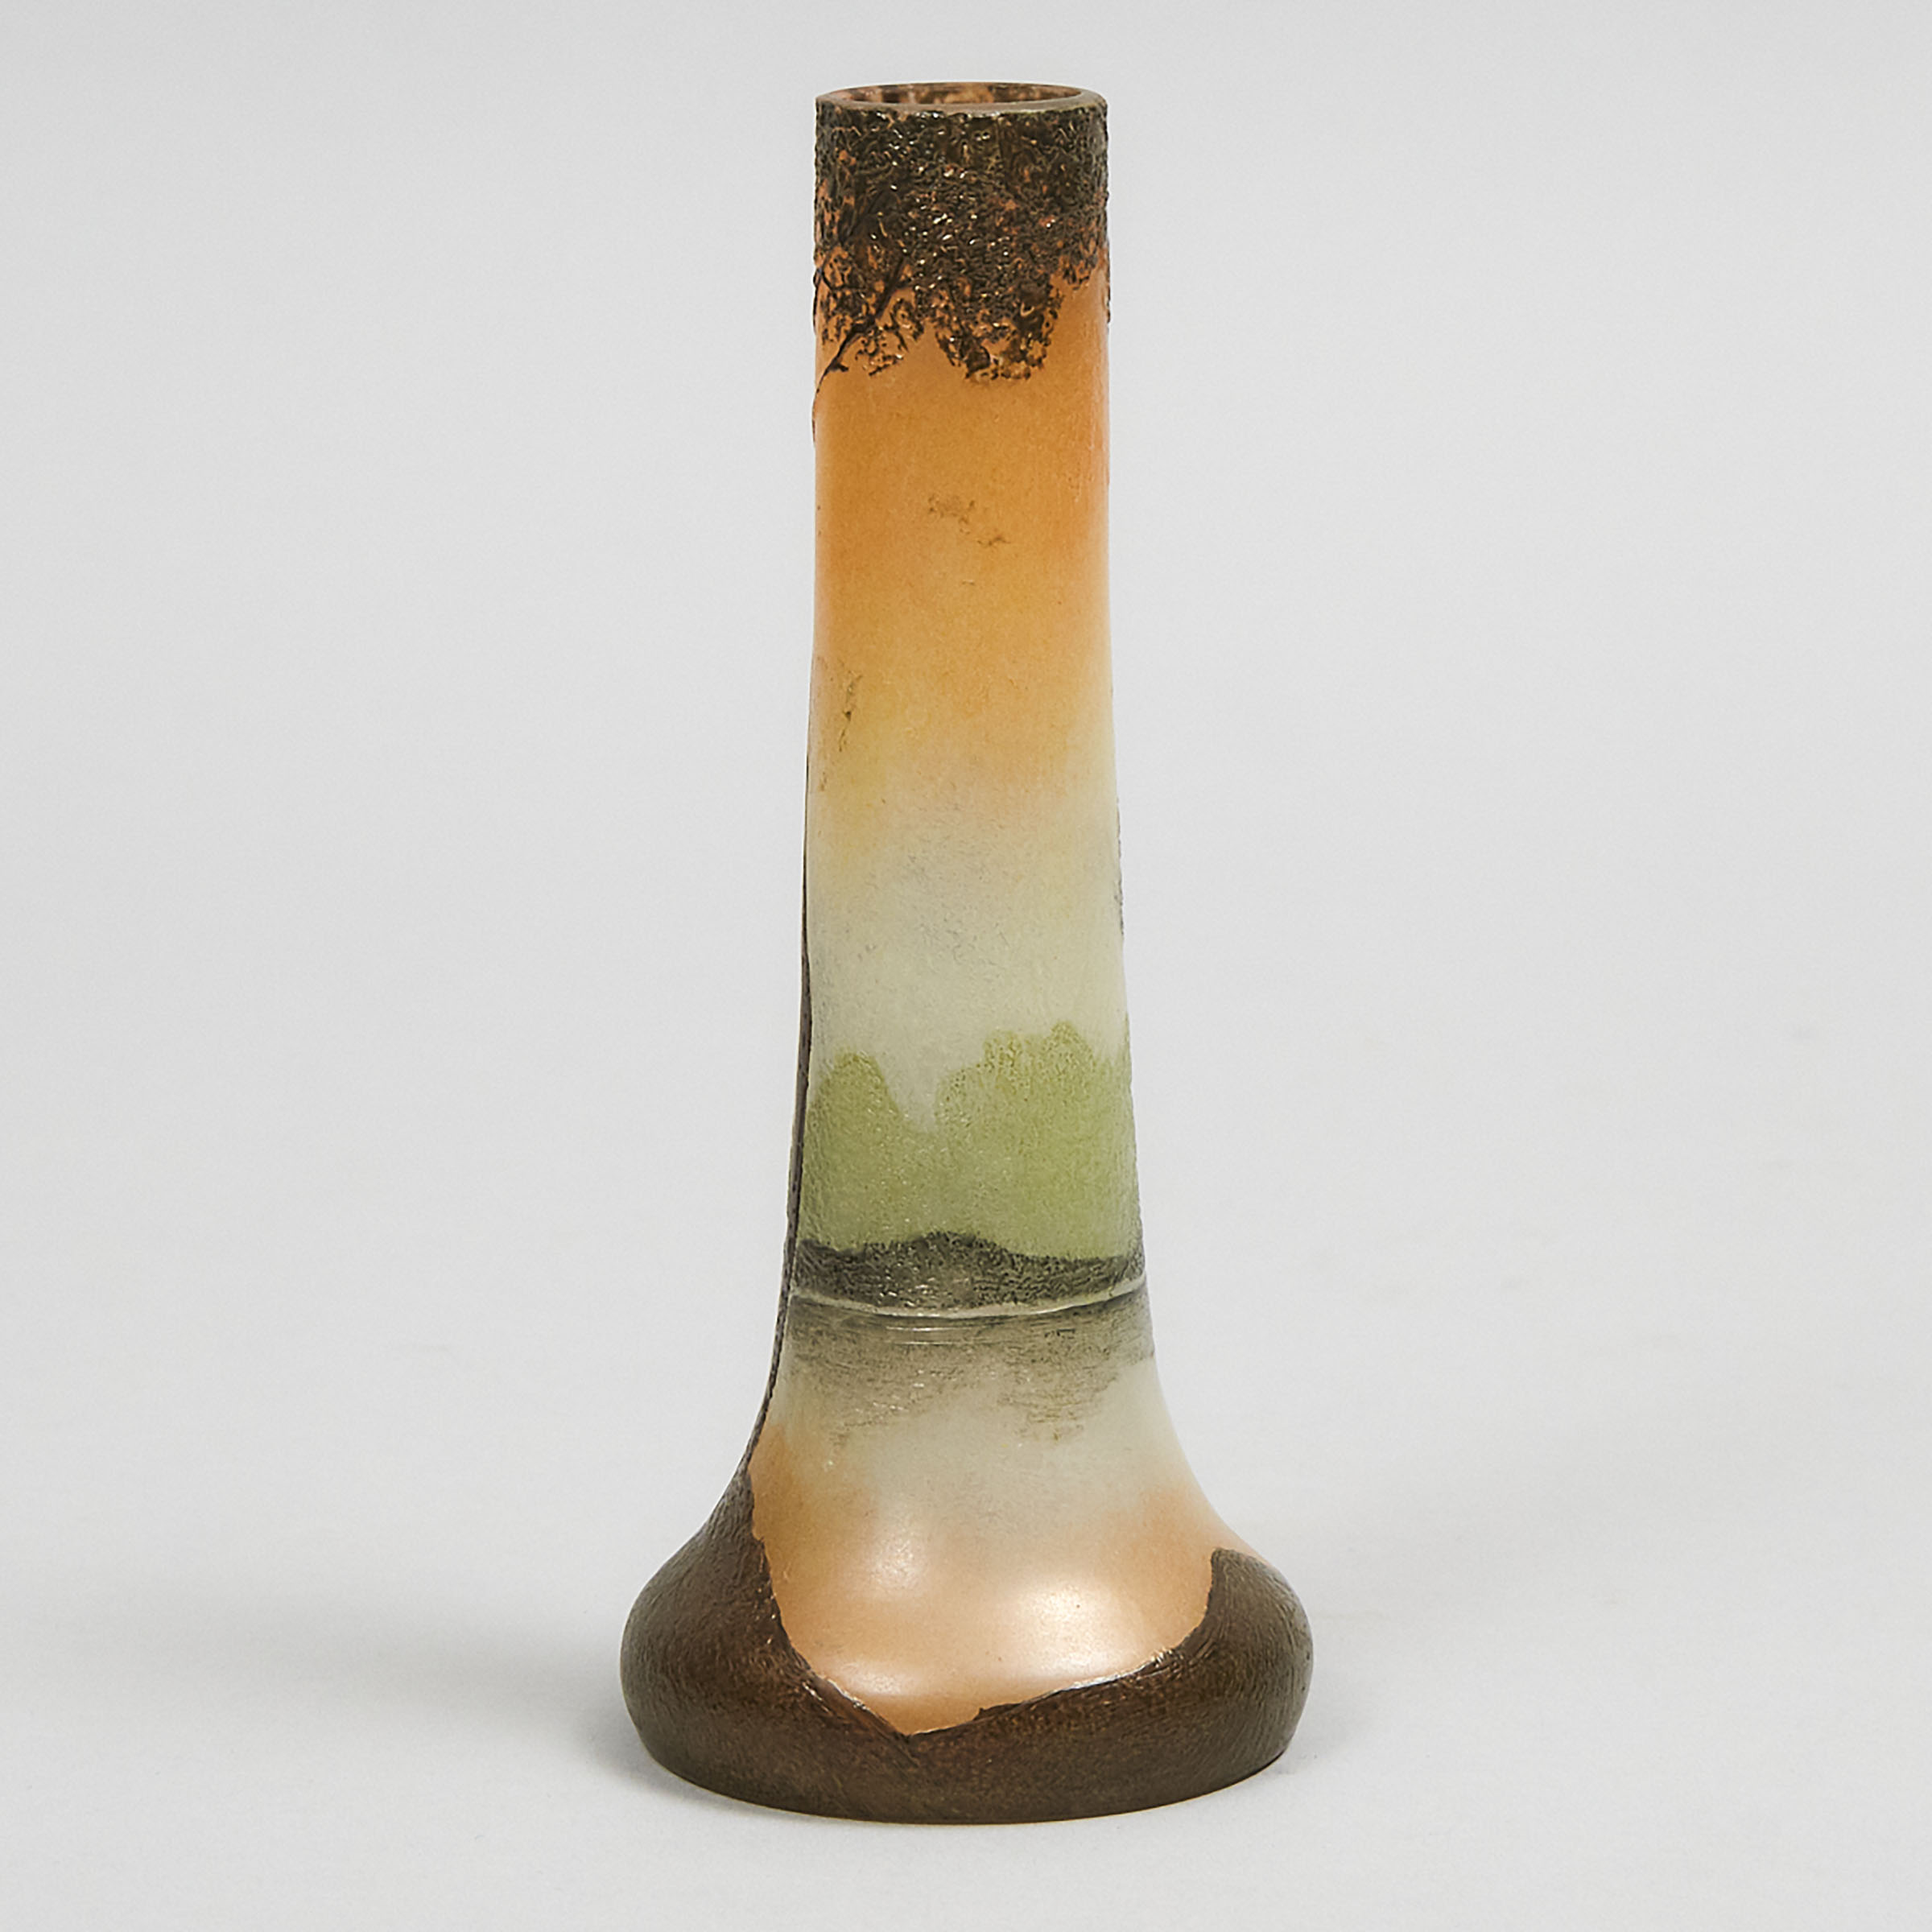 Legras Enameled Cameo Glass Landscape Vase, early 20th century